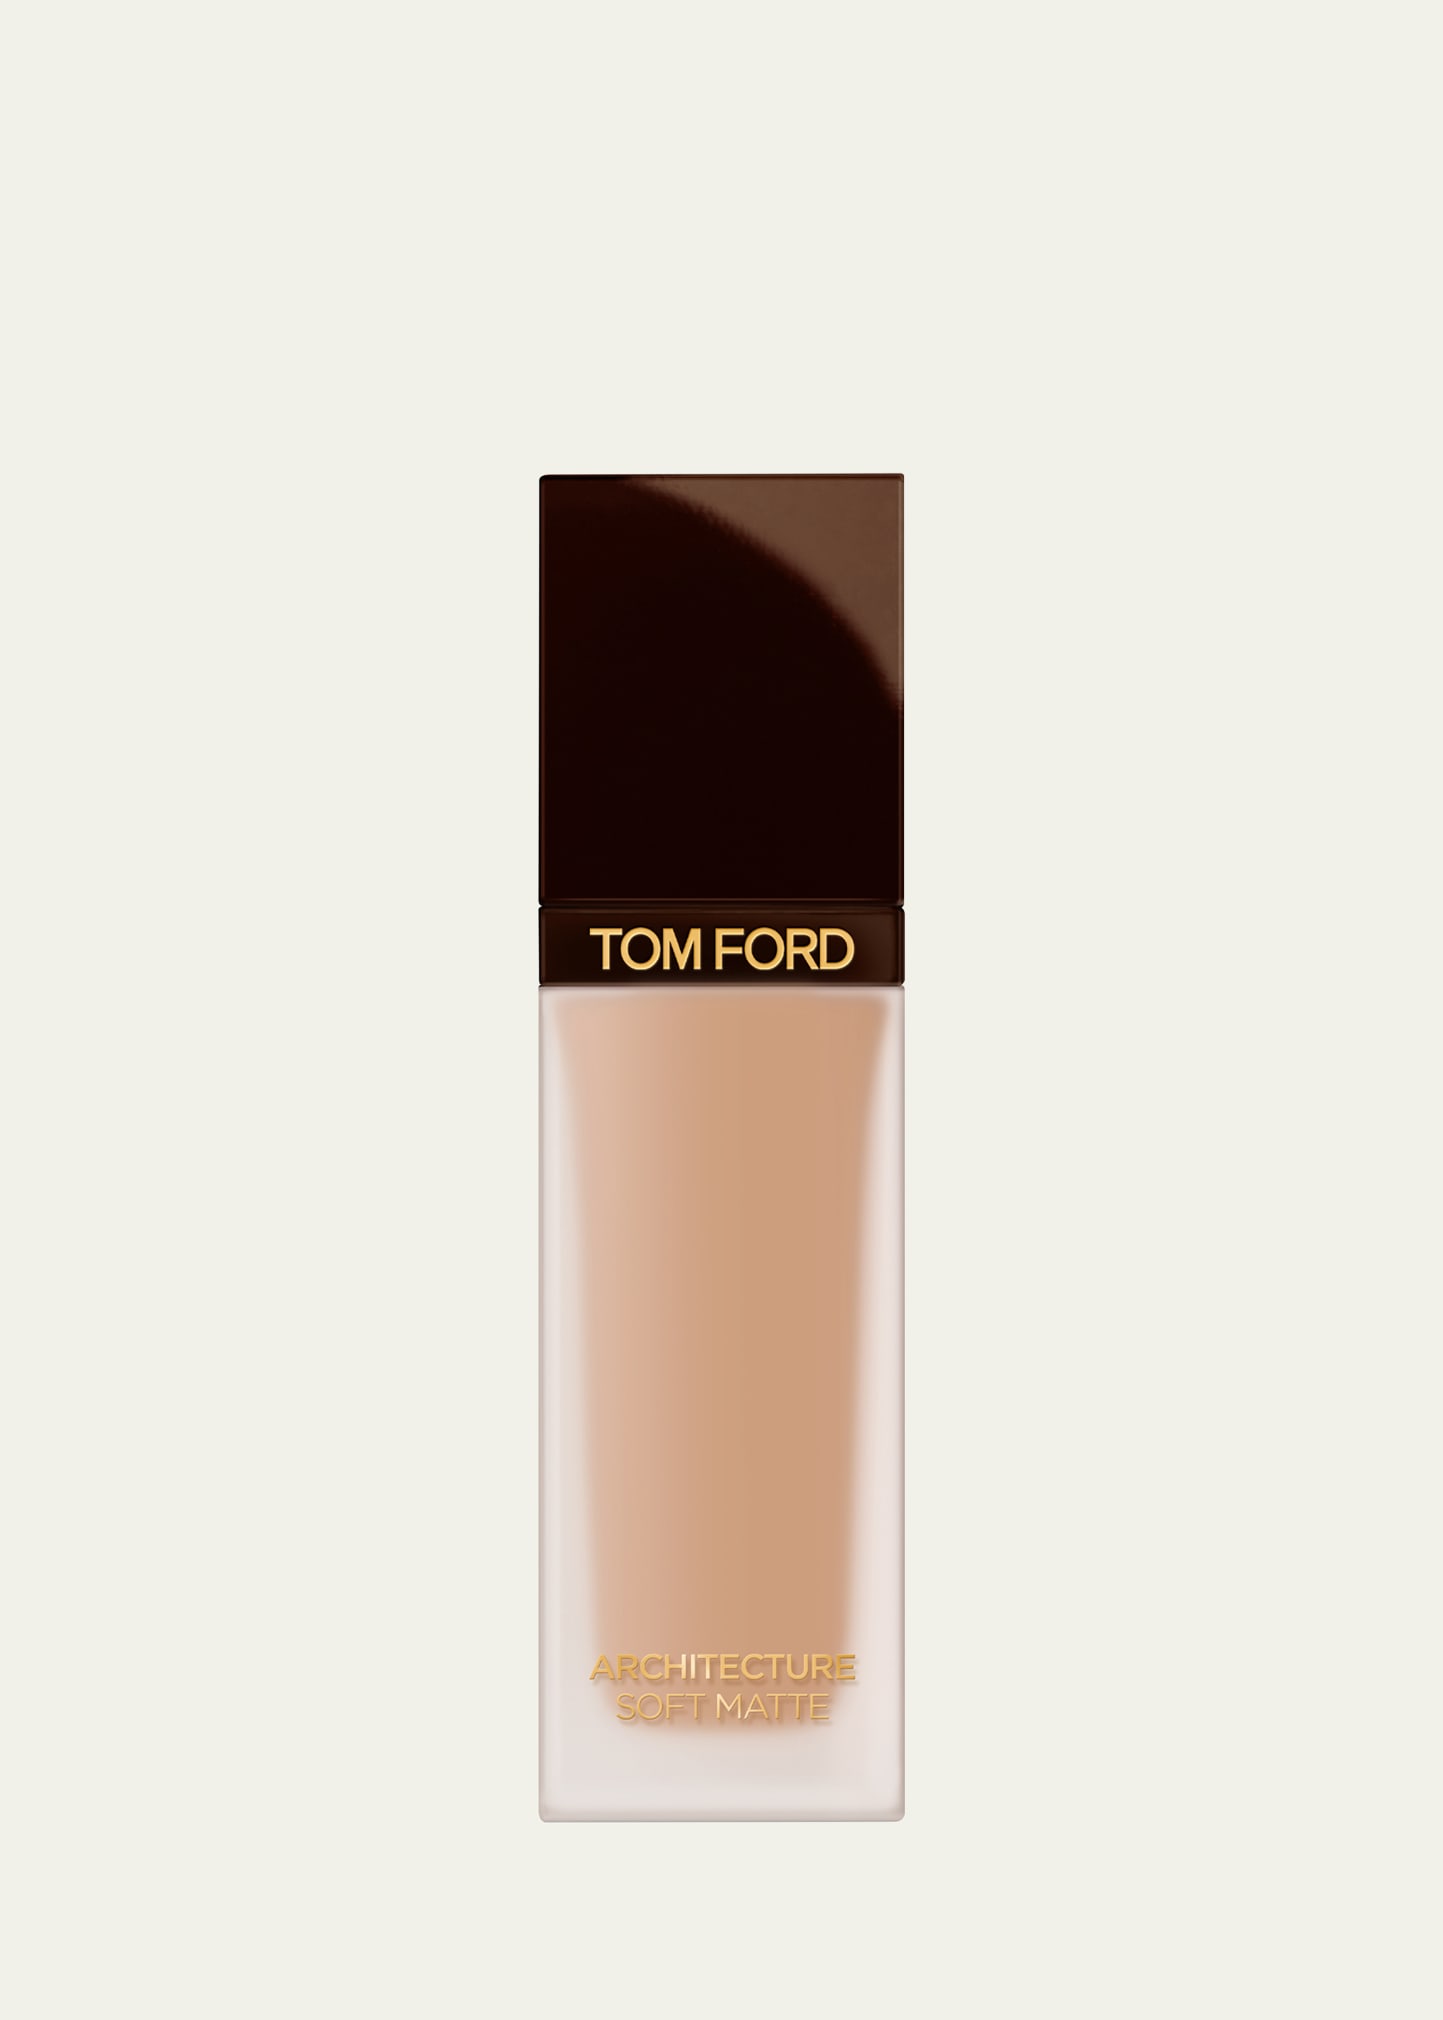 Tom Ford Architecture Soft Matte Foundation In Asm - 5.6 Ivory B